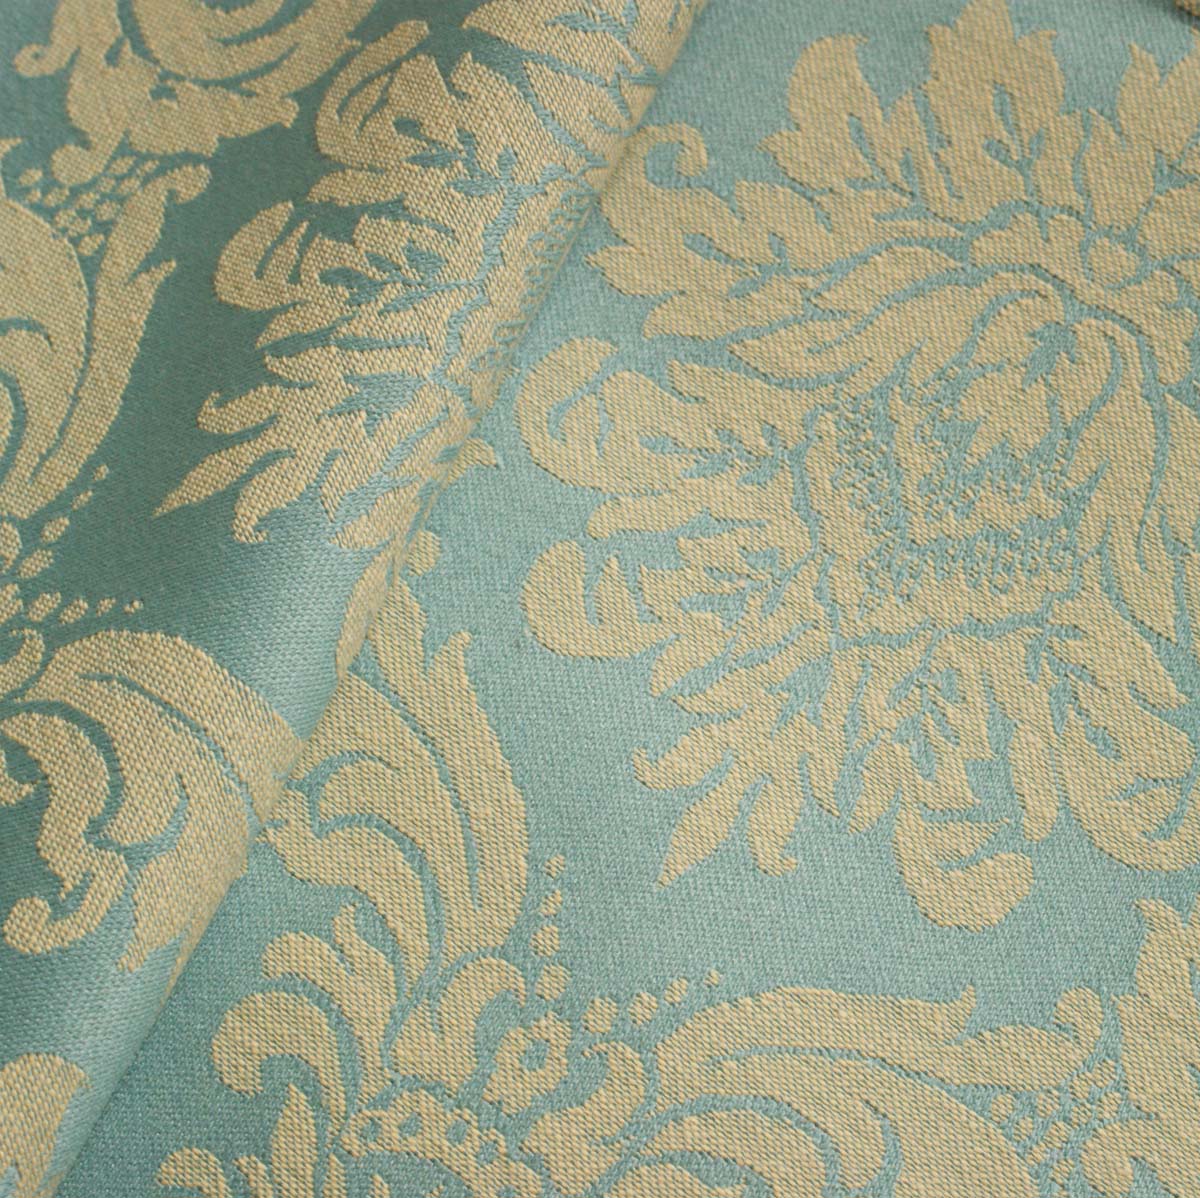 Melrose Damask Fabric By The Yard, 45% OFF